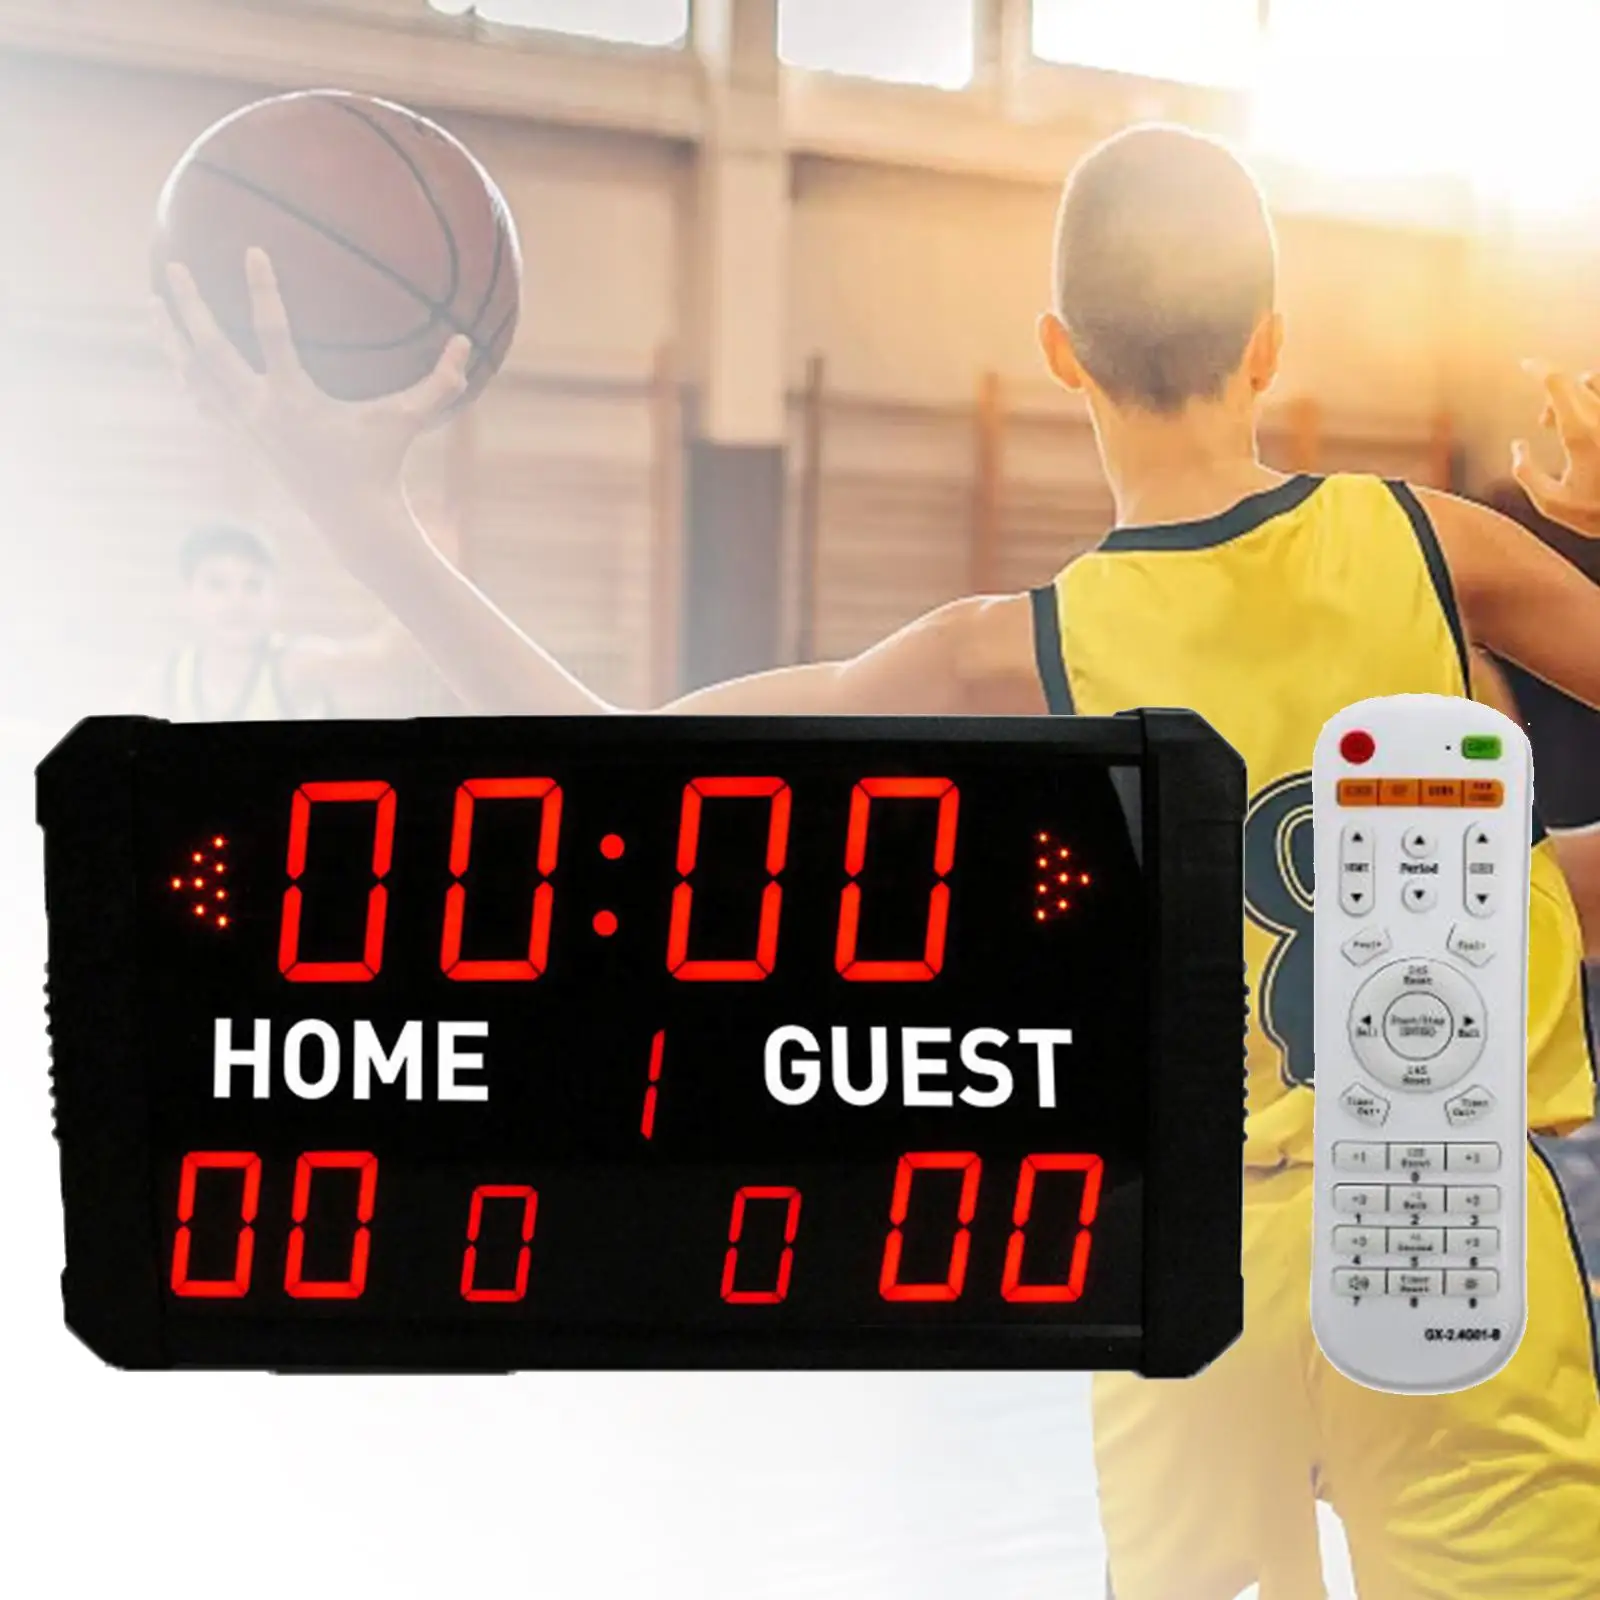 Basketball 24 Seconds  Scoreboard  Suitable  Games with 76.2mm, 58.4mm, 45. 7mm Red LED Bright LED Display